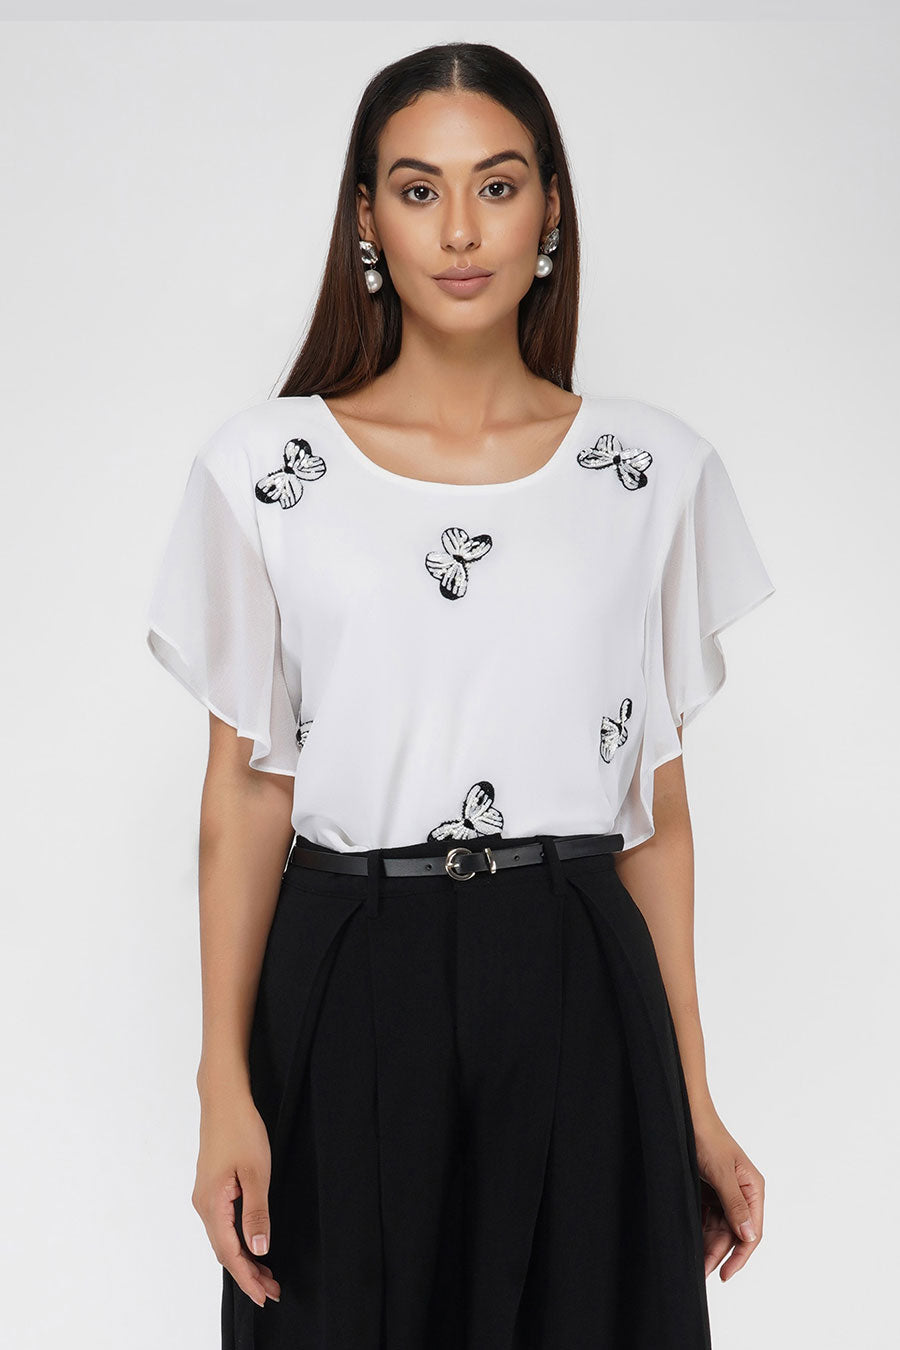 Sequin Butterfly Motif White Top